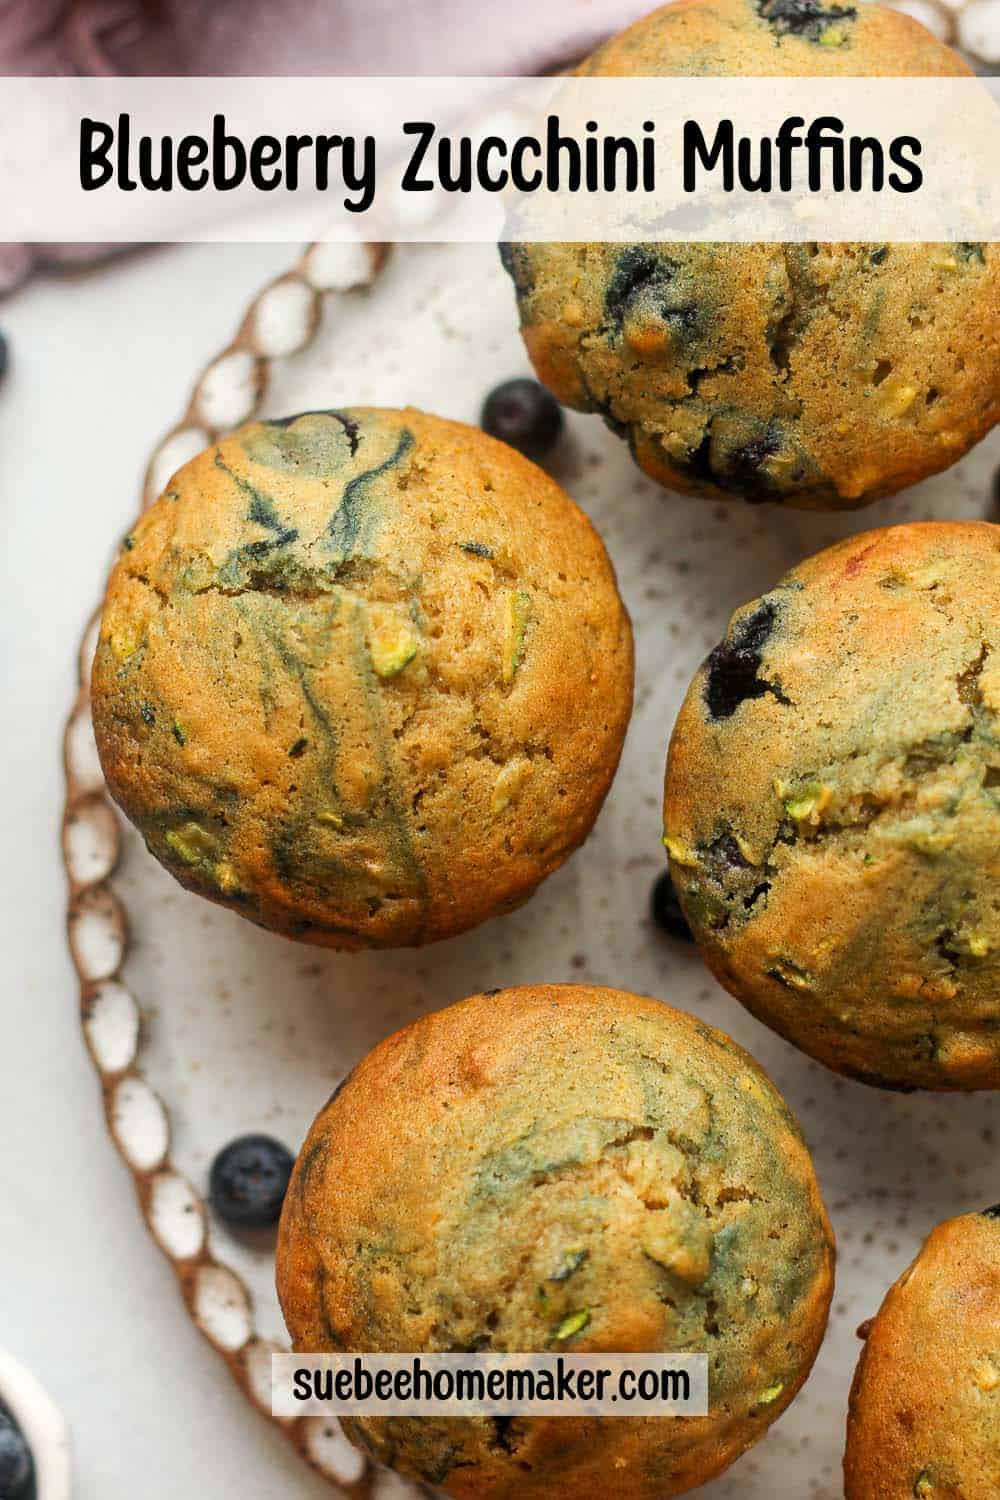 A plate of blueberry zucchini muffins.